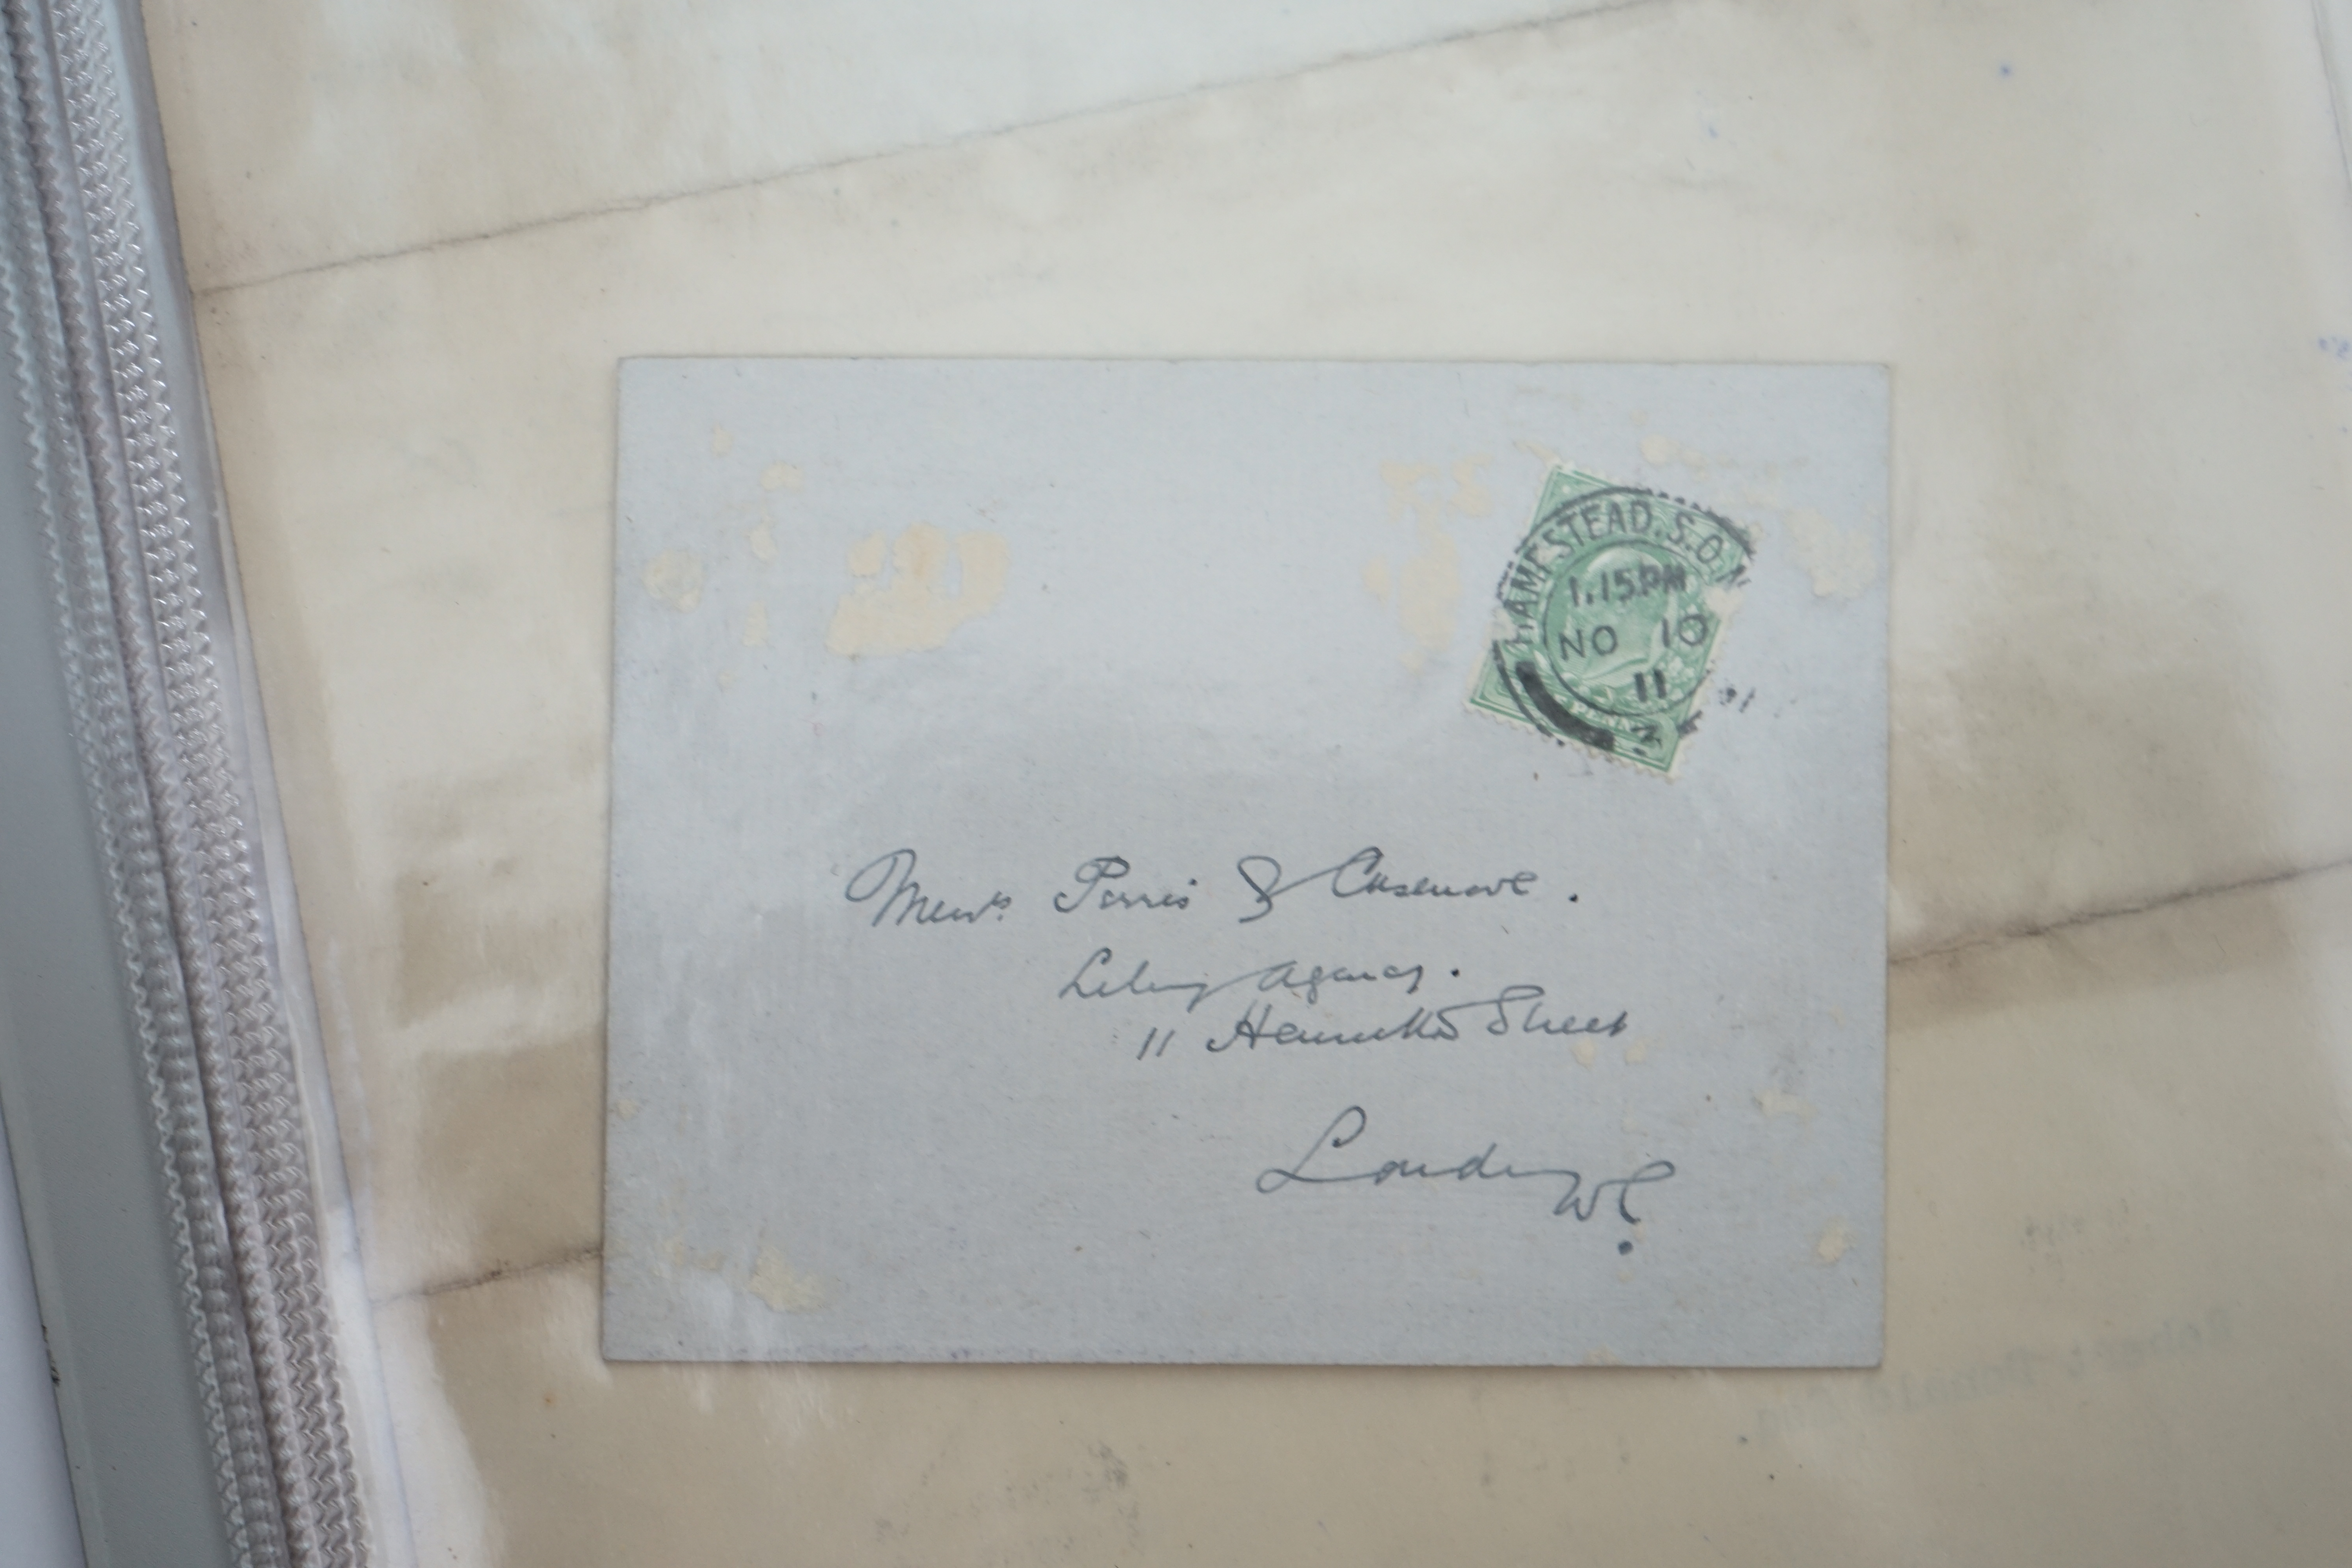 A collection of 14 autograph letters from British Prime Ministers, 1767-1912, with a signed photograph of David Lloyd George and a card from H G Wells, 1911